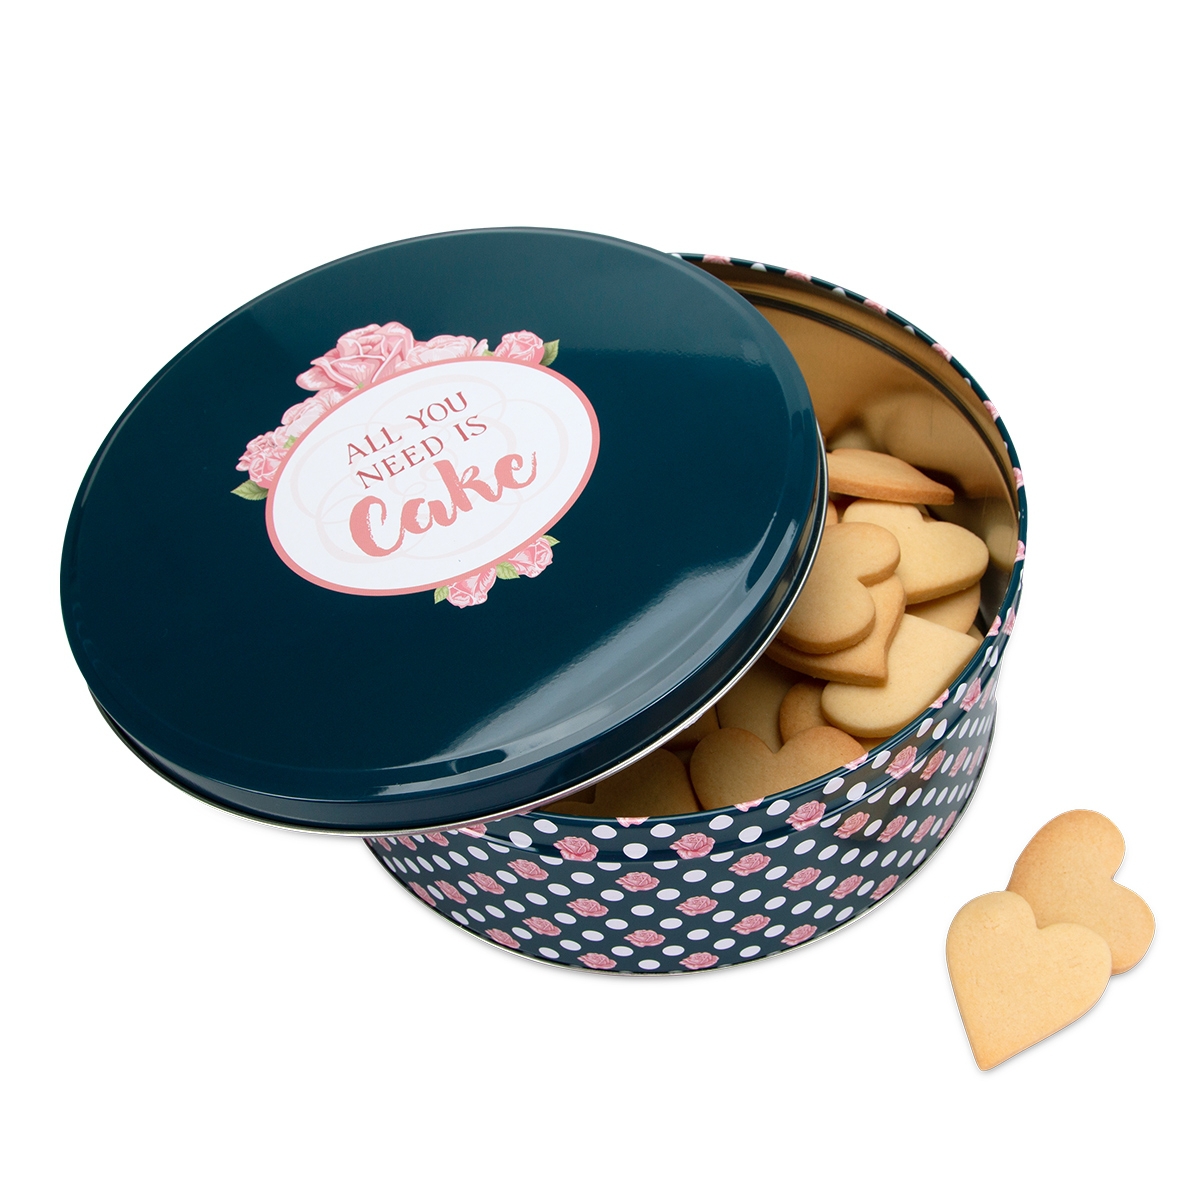 Städter - Cookie box - All you need is Cake - Colorful - different sizes and shapes